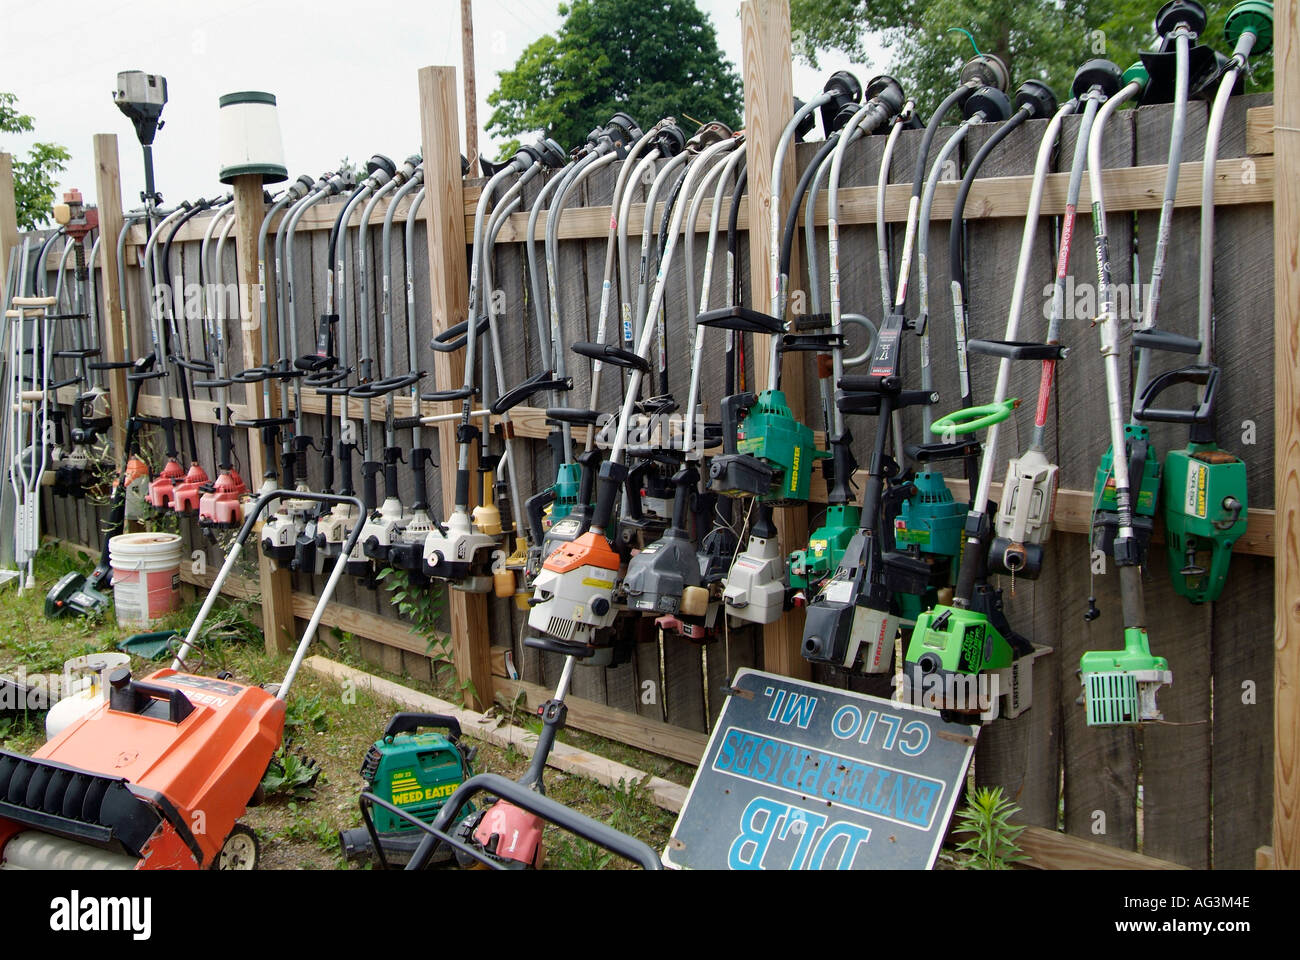 Display of gas and electric grass and weed trimmers hang on a fence at a flea market Stock Photo